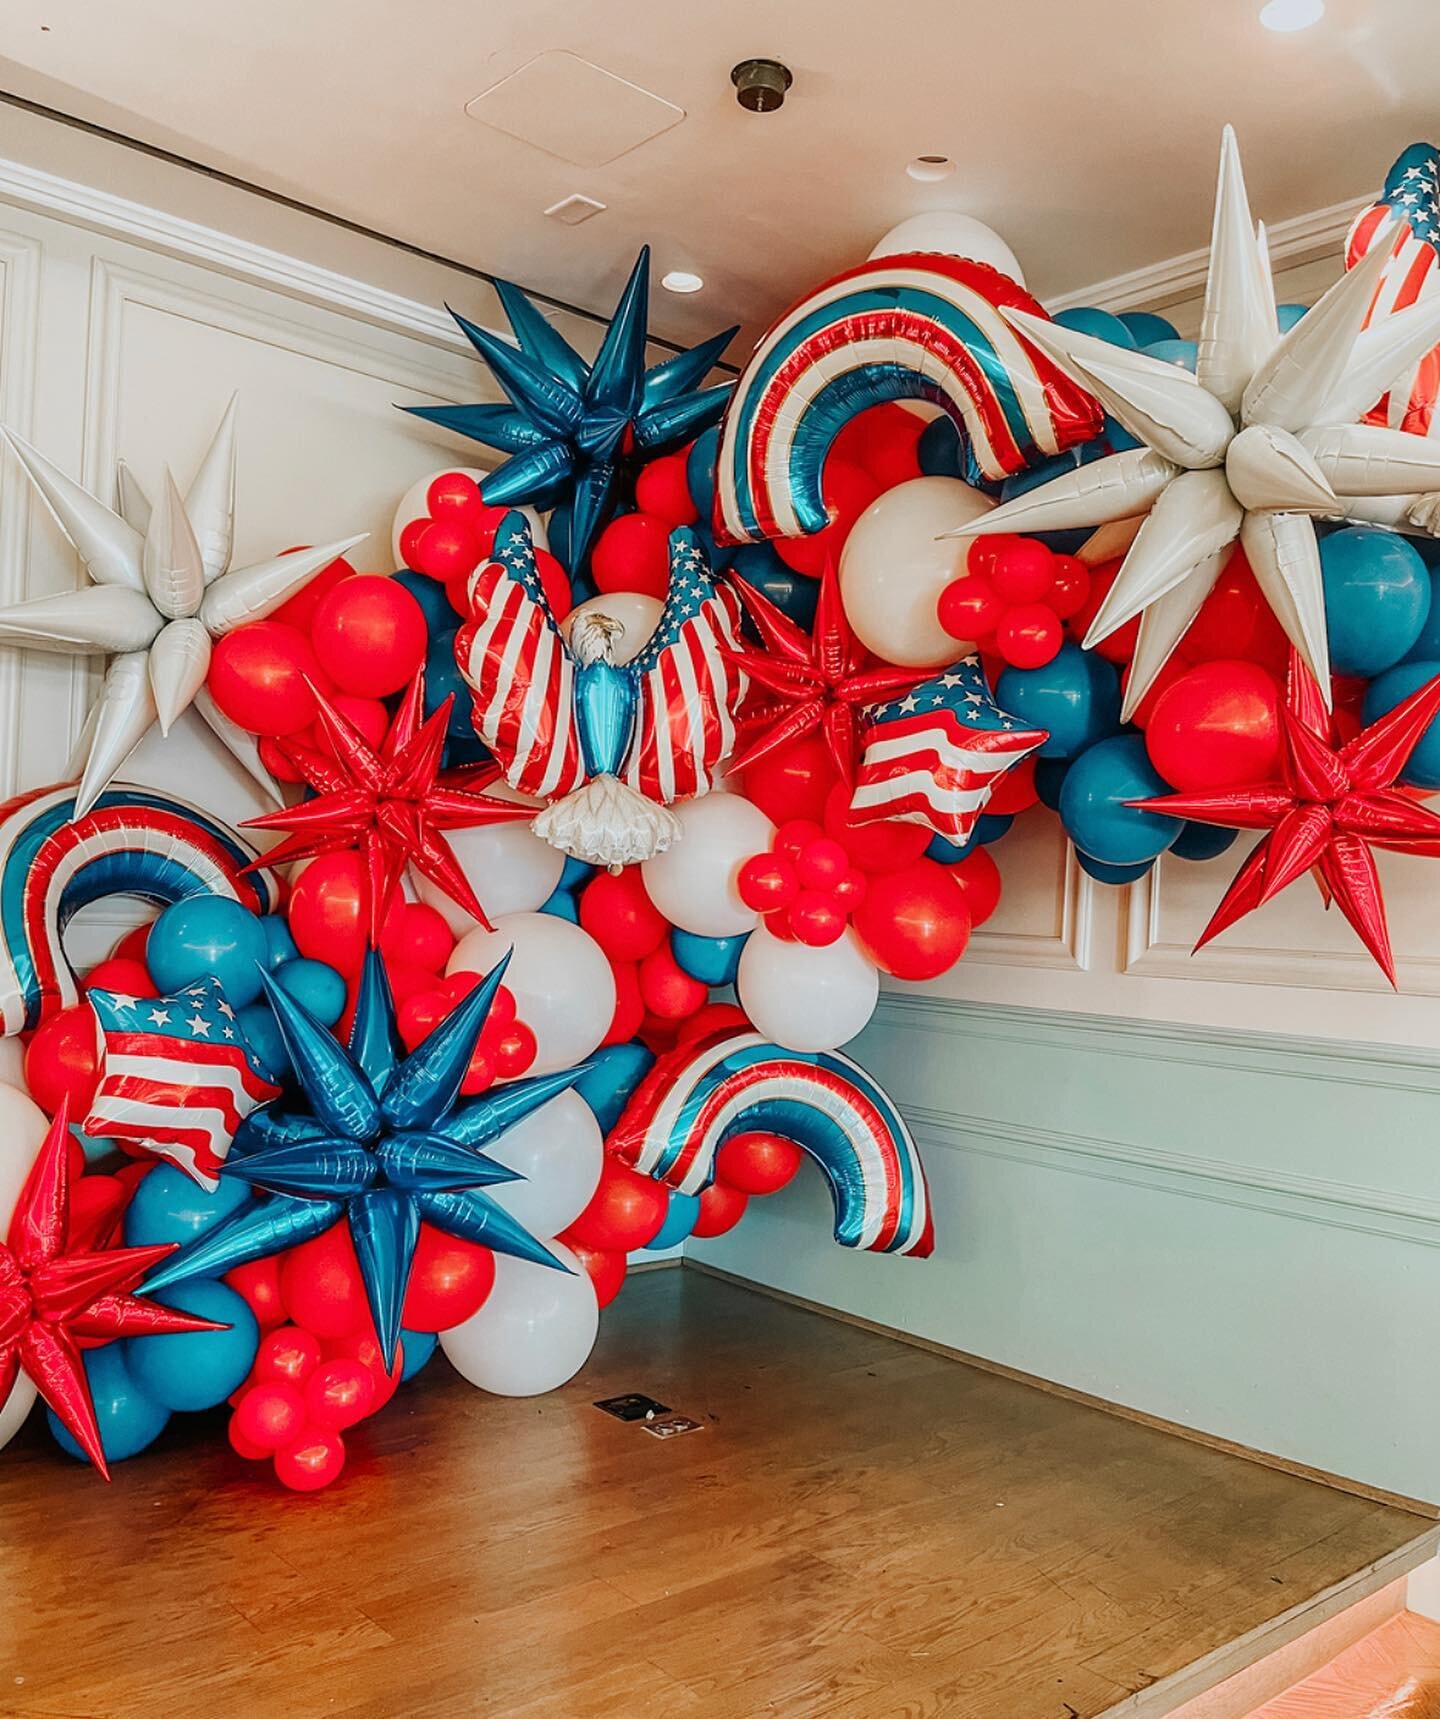 Gettin&rsquo; in that Memorial weekend mindset😎🇺🇸
&bull;
&bull;
&bull;
#balloontherapy #okc #okcparty #america #memorialday #memorial #memorialweekend #partyballoons #patriotic #redwhiteandblue #america #partytime #partymode #weekendmindset #holid